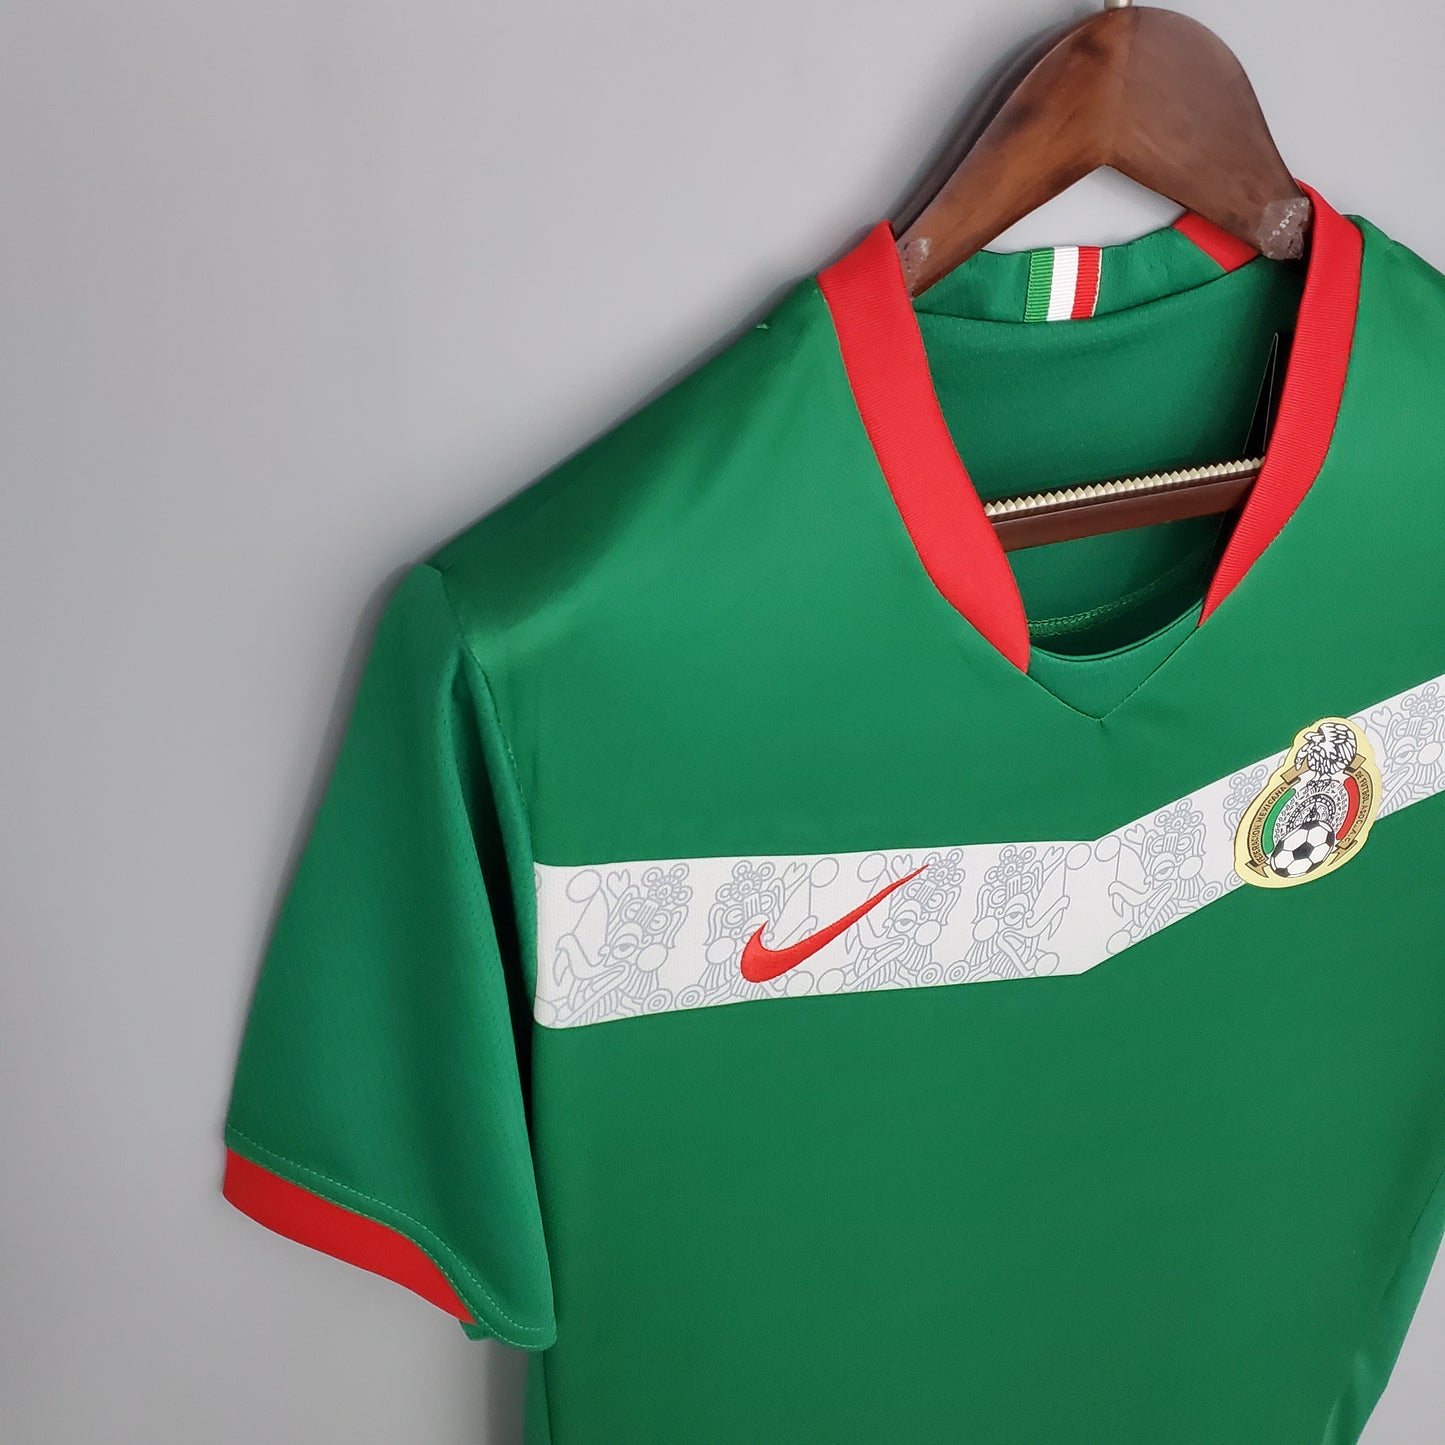 Mexico 2006 Home Jersey